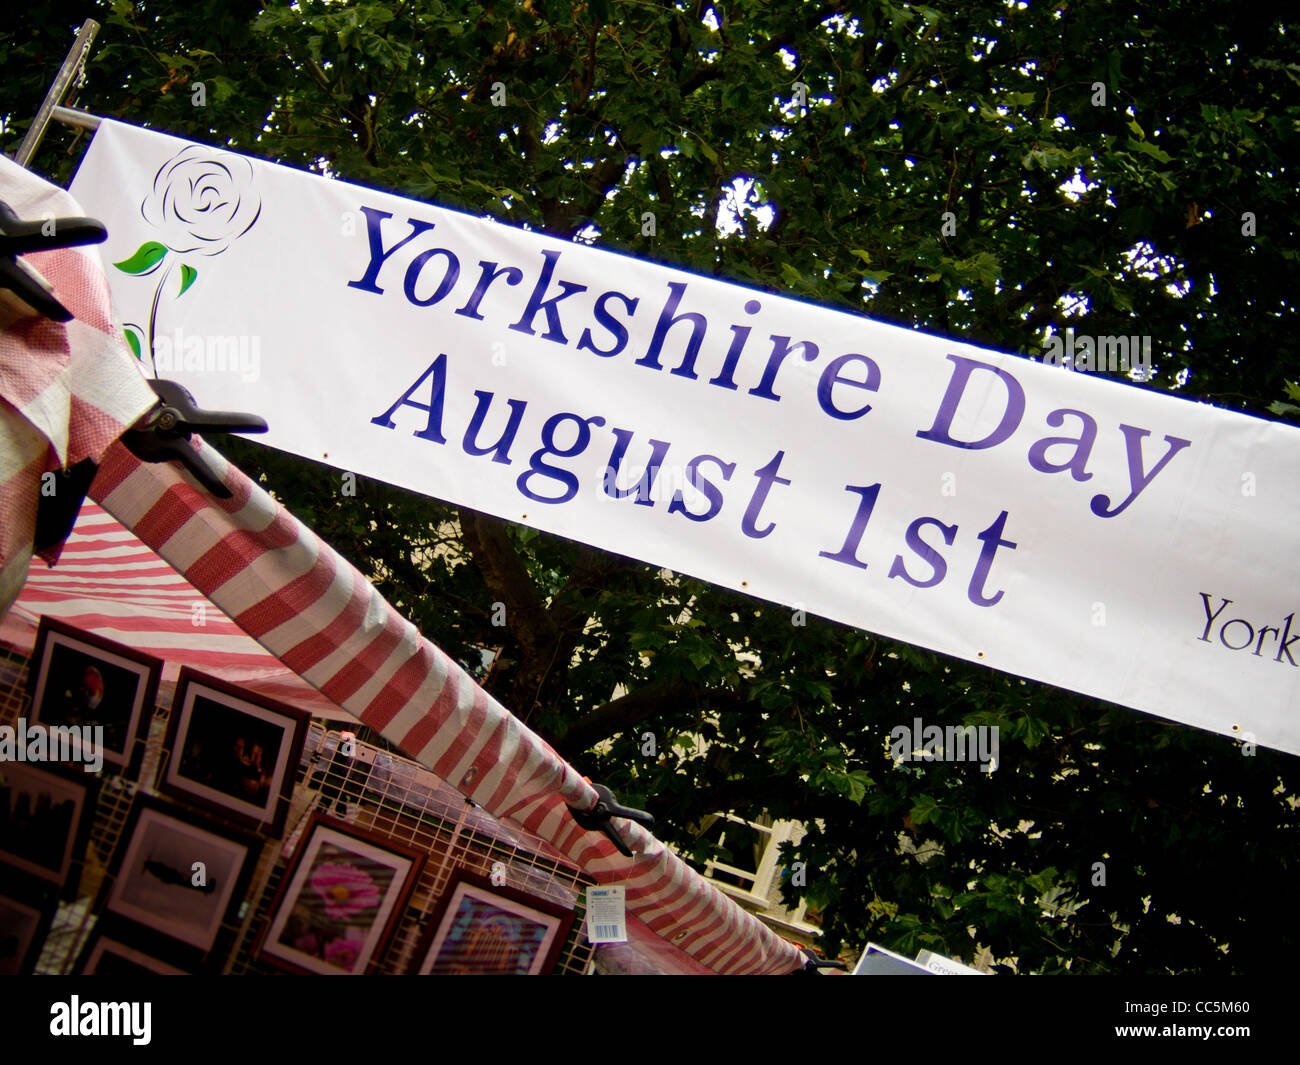 Overhead street banner advertising Yorkshire day on the 1st of August, in the city of York. Stock Photo